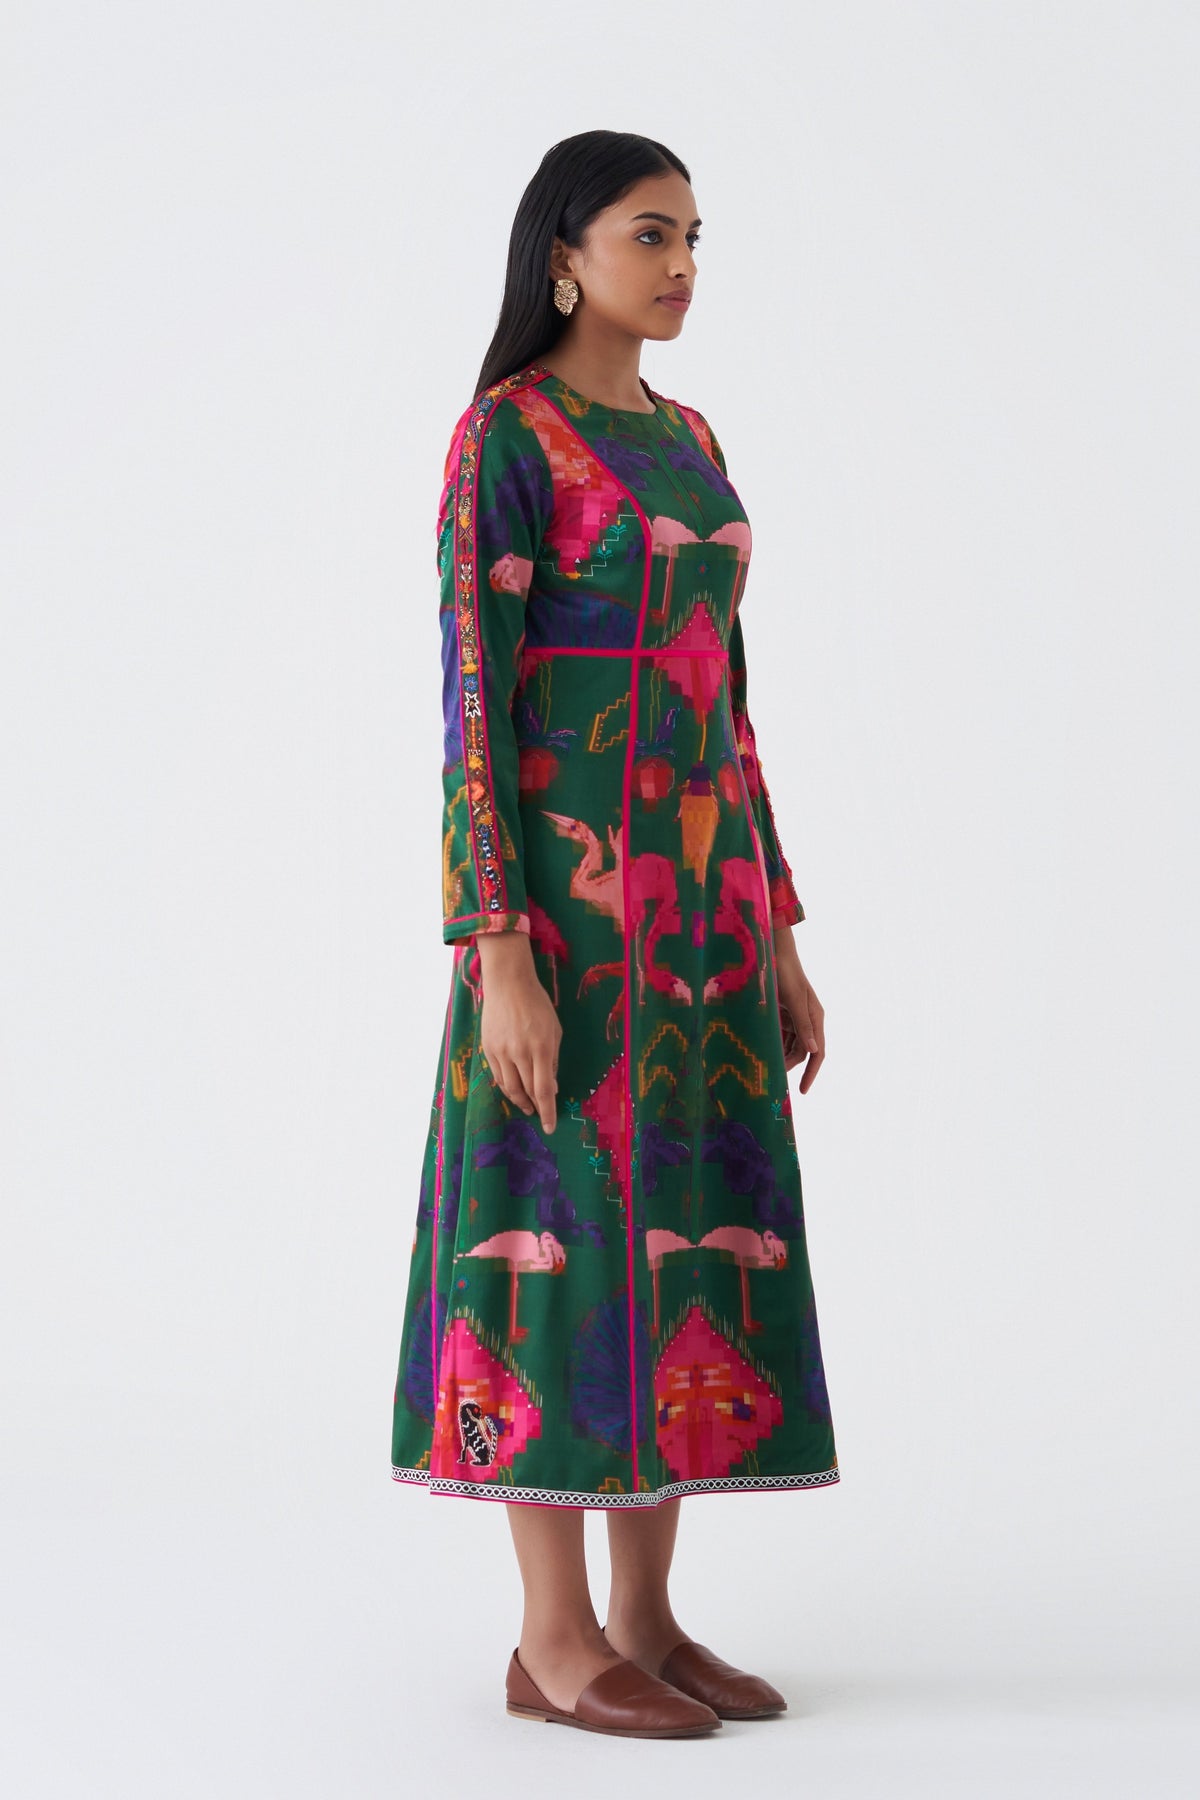 Print and Embroidered Oaxaca Verde Dress